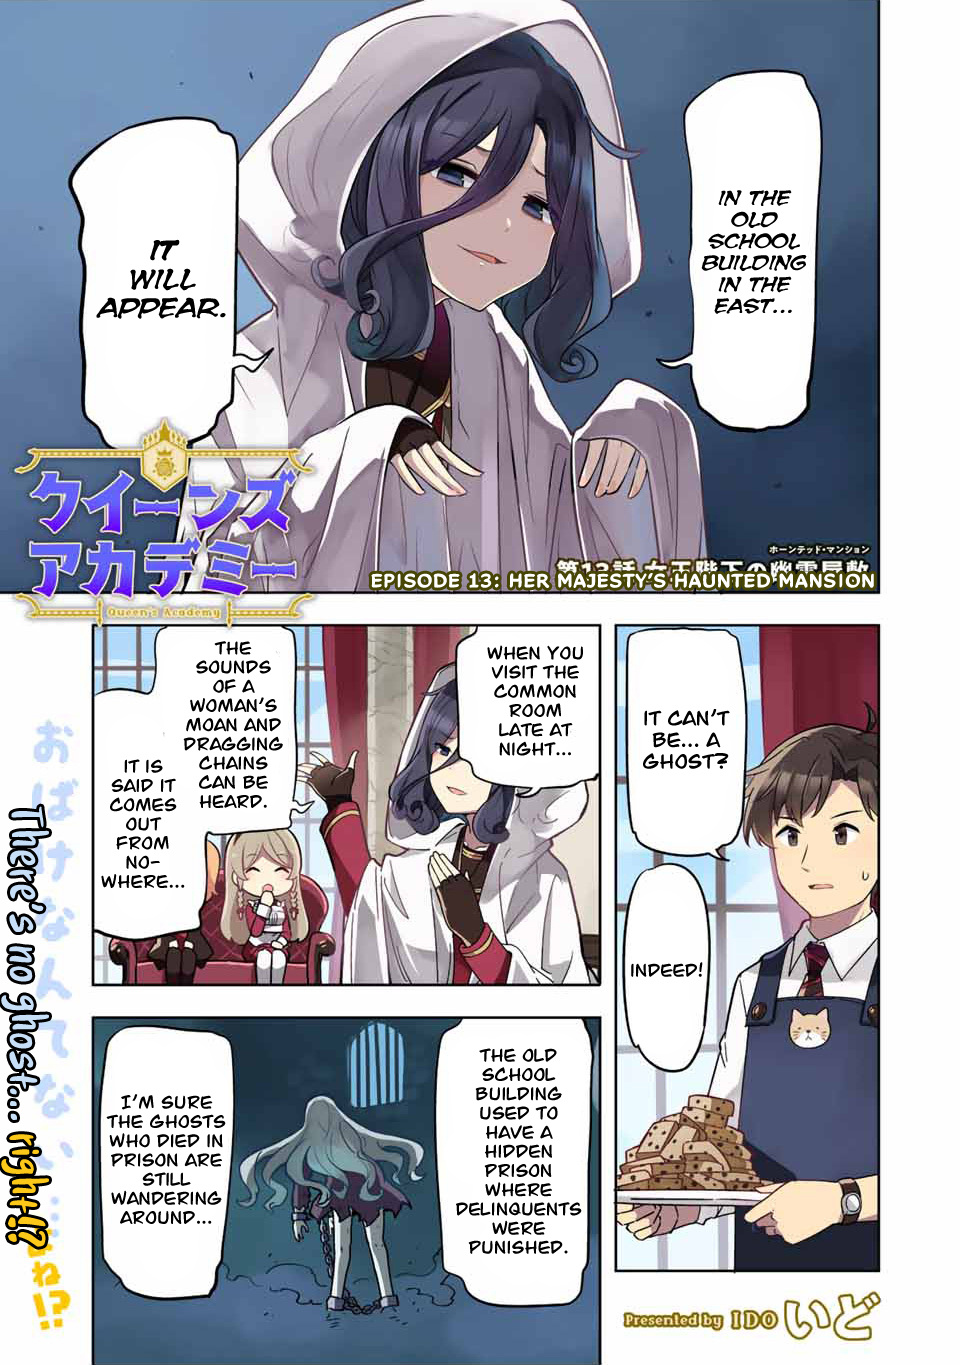 Queen's Academy Vol.1 Chapter 13: Her Majesty's Haunted Mansion - Picture 2